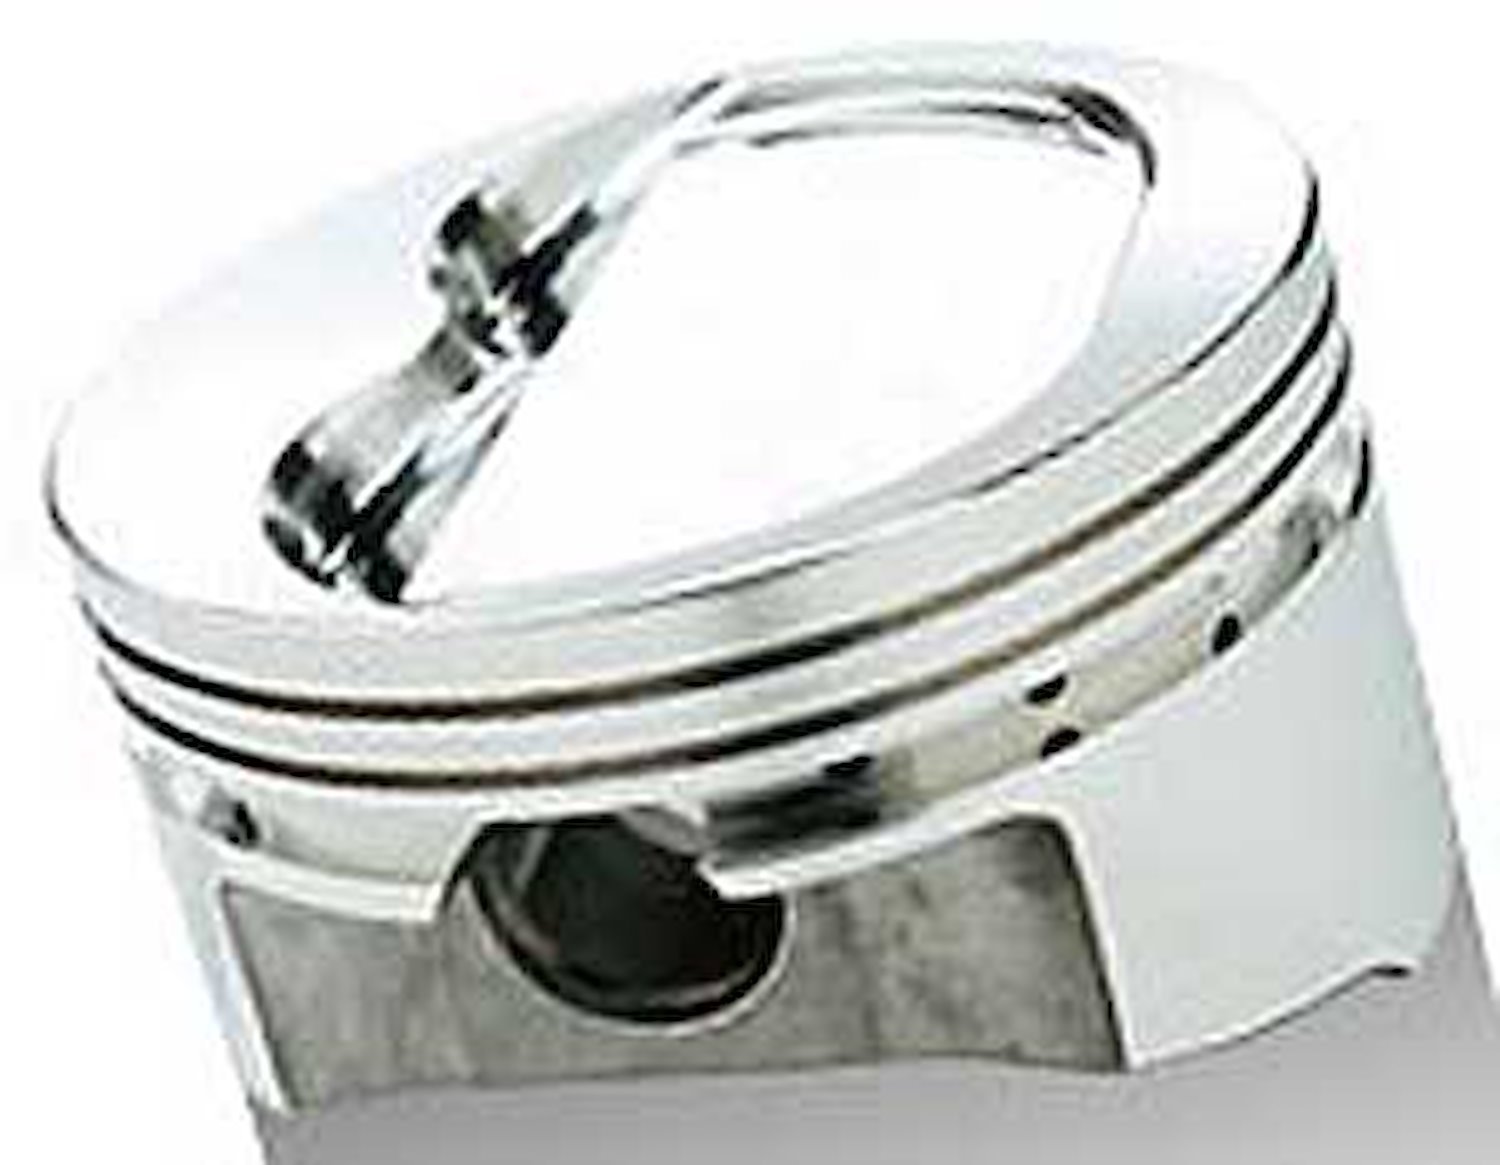 SRP Inverted Dome Pistons for Small Block Chevy Bore 4.020"